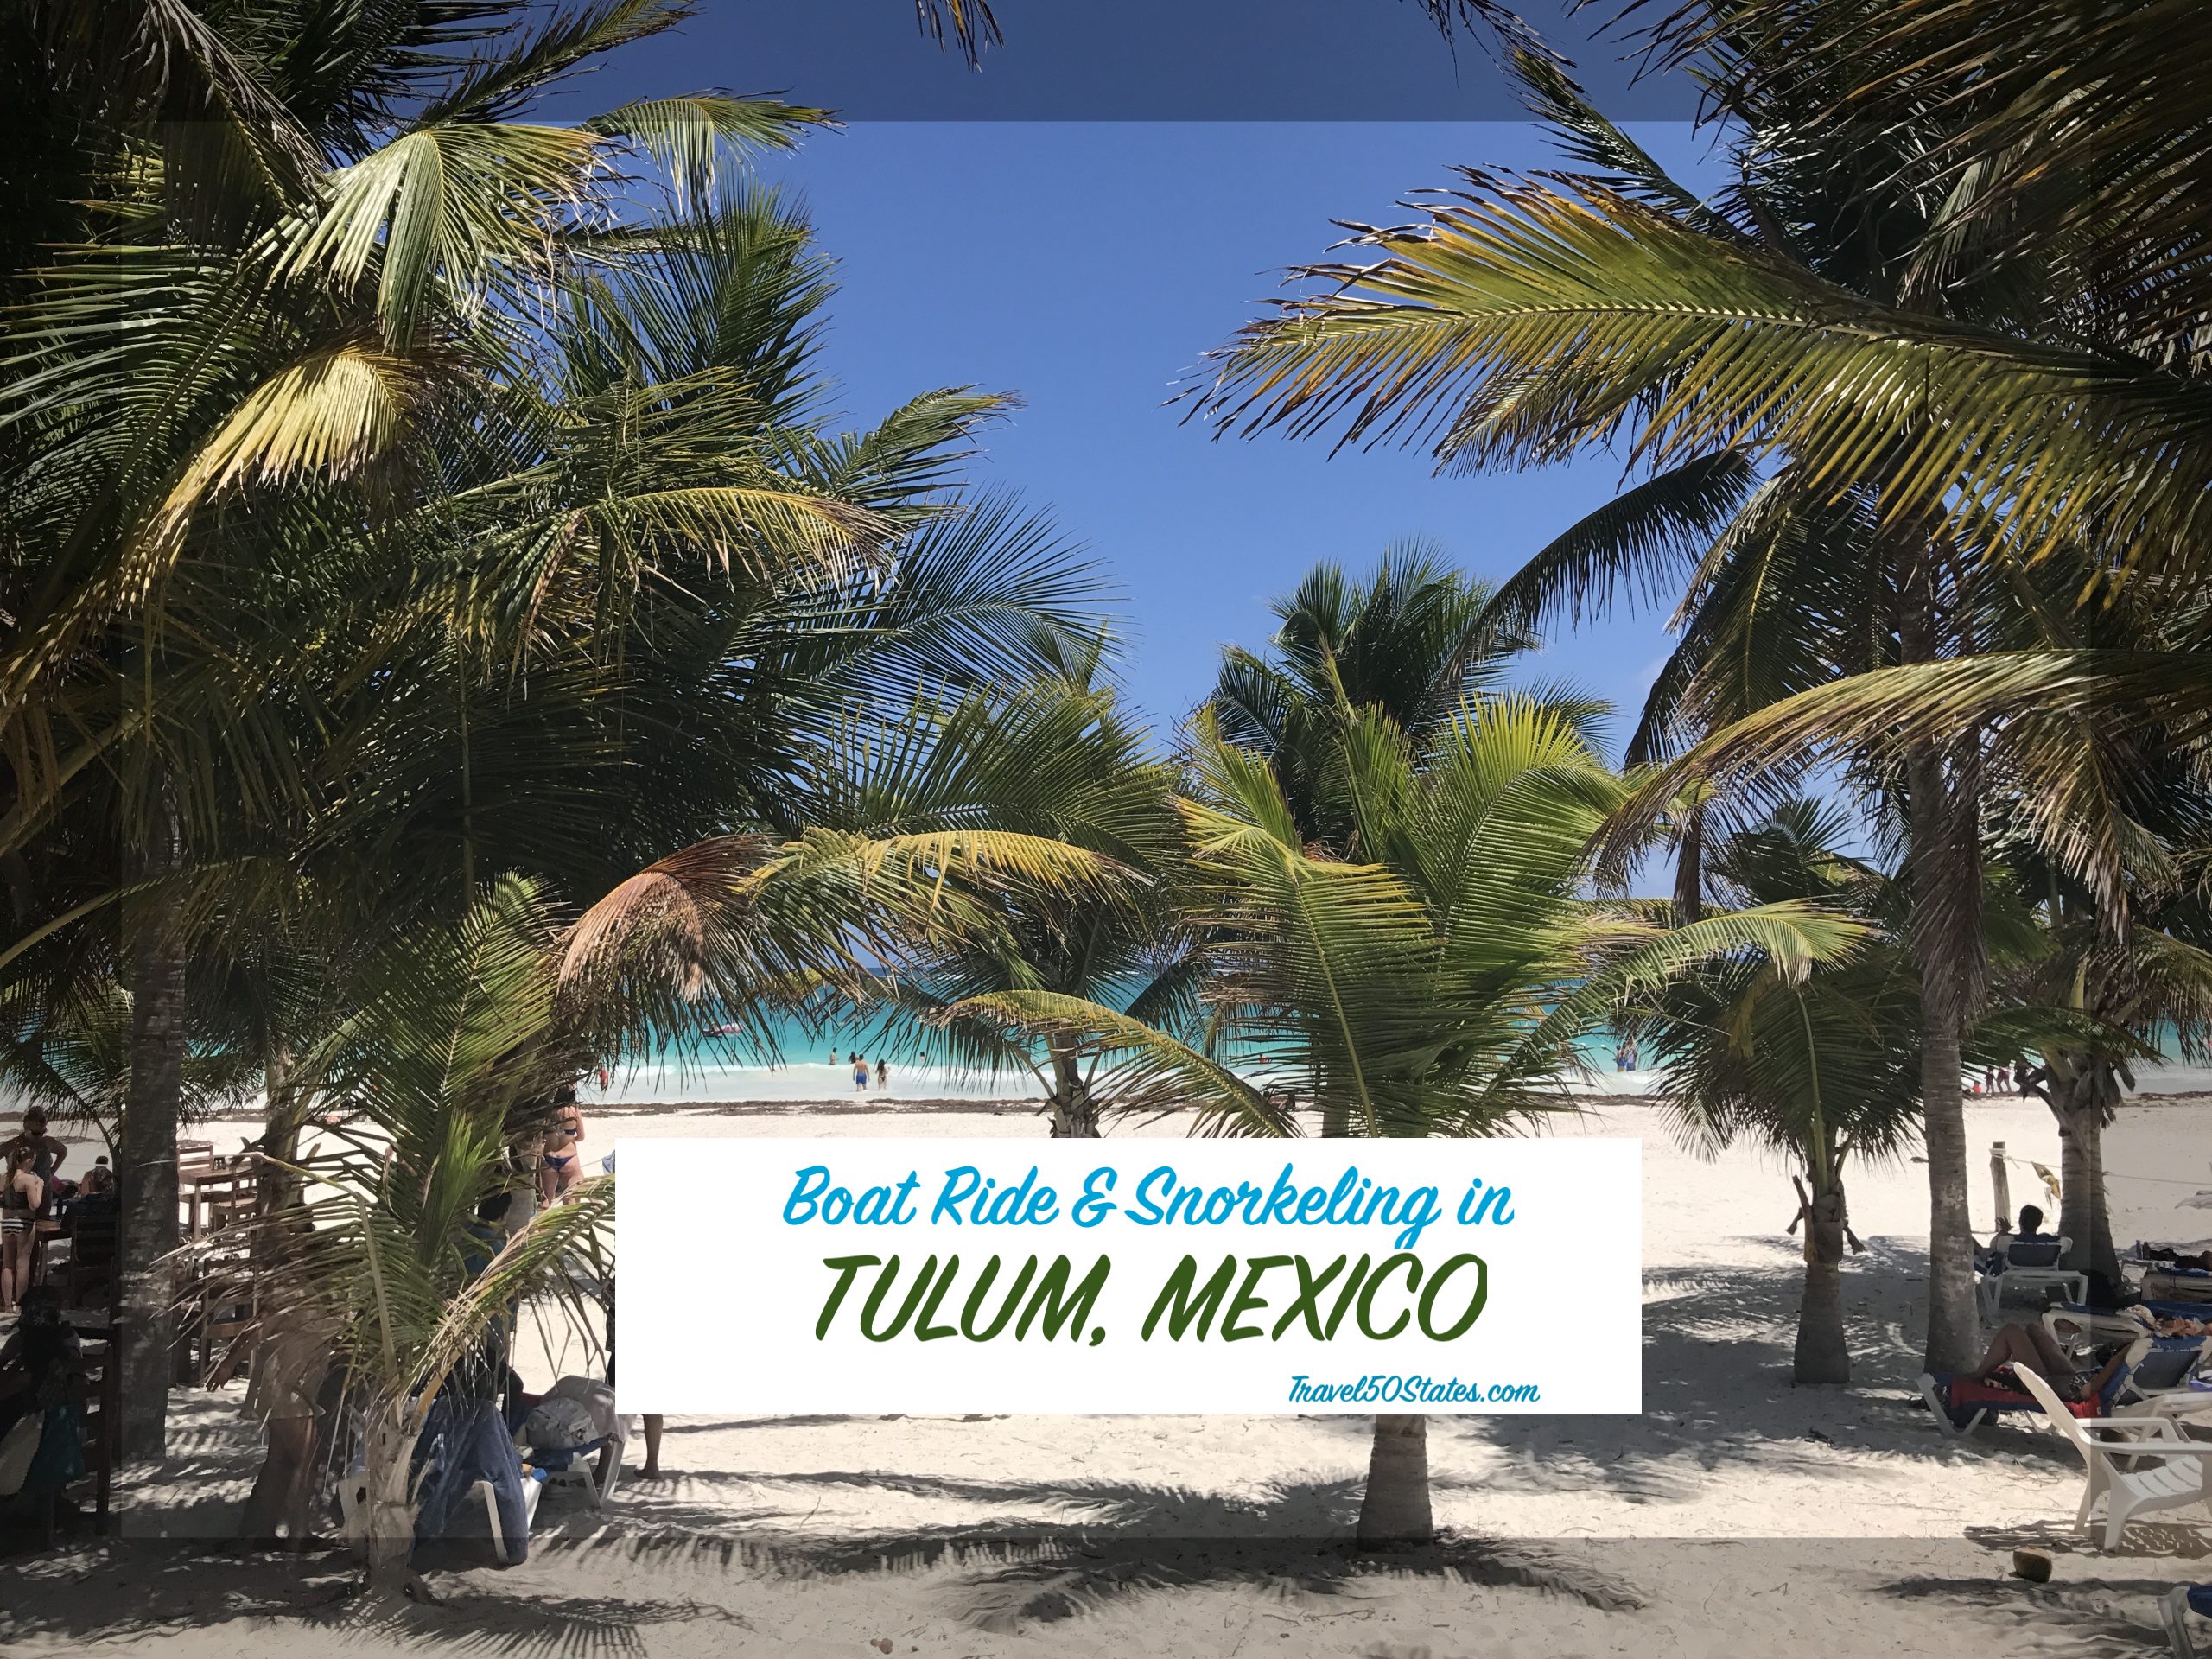 Tulum Boat Ride and Snorkeling